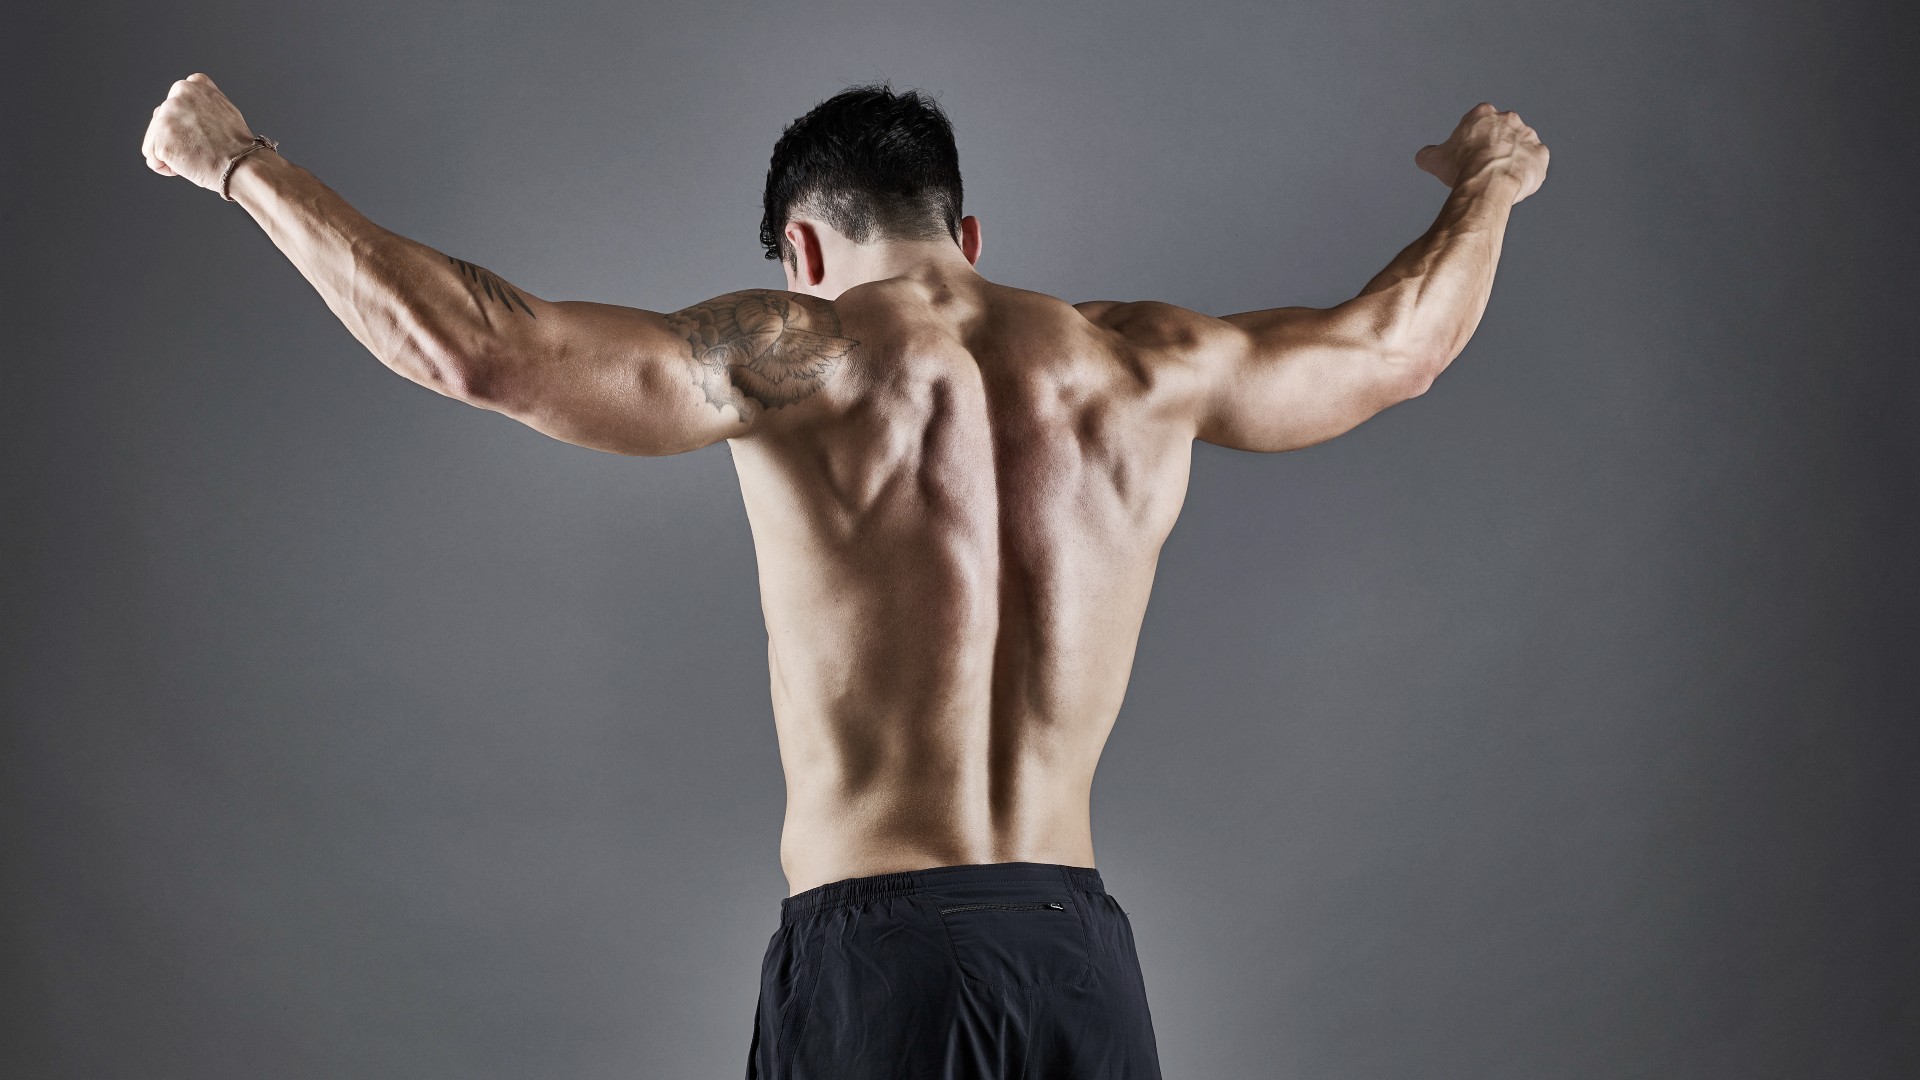 I'm a personal trainer — here are 3 best compound exercises for cutting  V-shaped back muscles